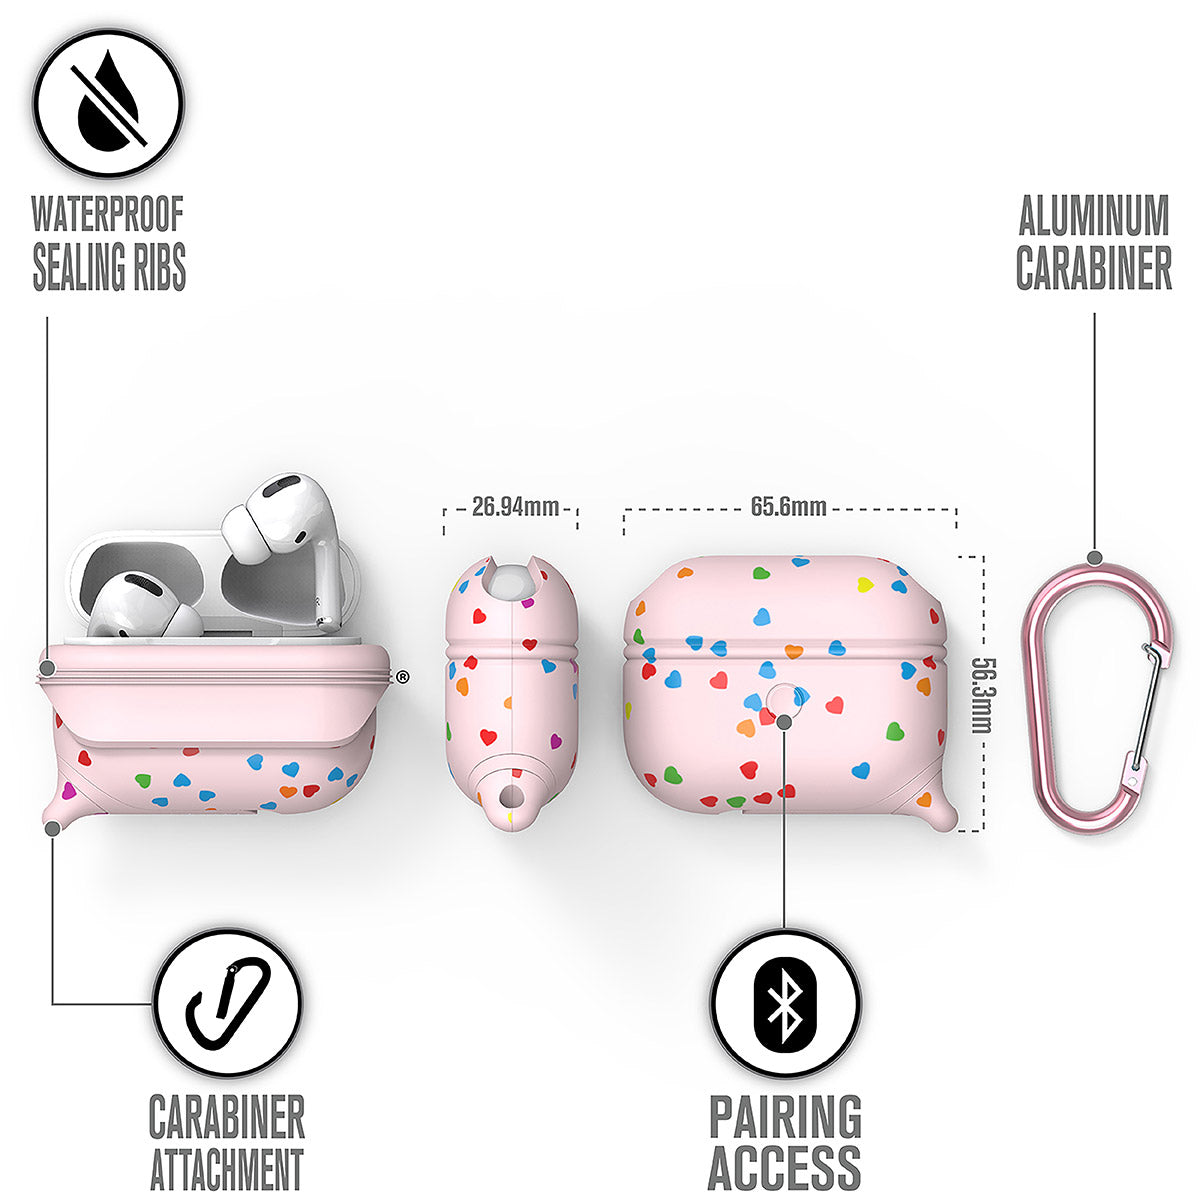 catalyst airpods pro gen 2 1 waterproof case carabiner special edition pink with hearts different views showing the sealing ribs carabiner attachment loop and pairing access text reads waterproof sealing ribs aluminum carabiner carabiner attachment pairing access